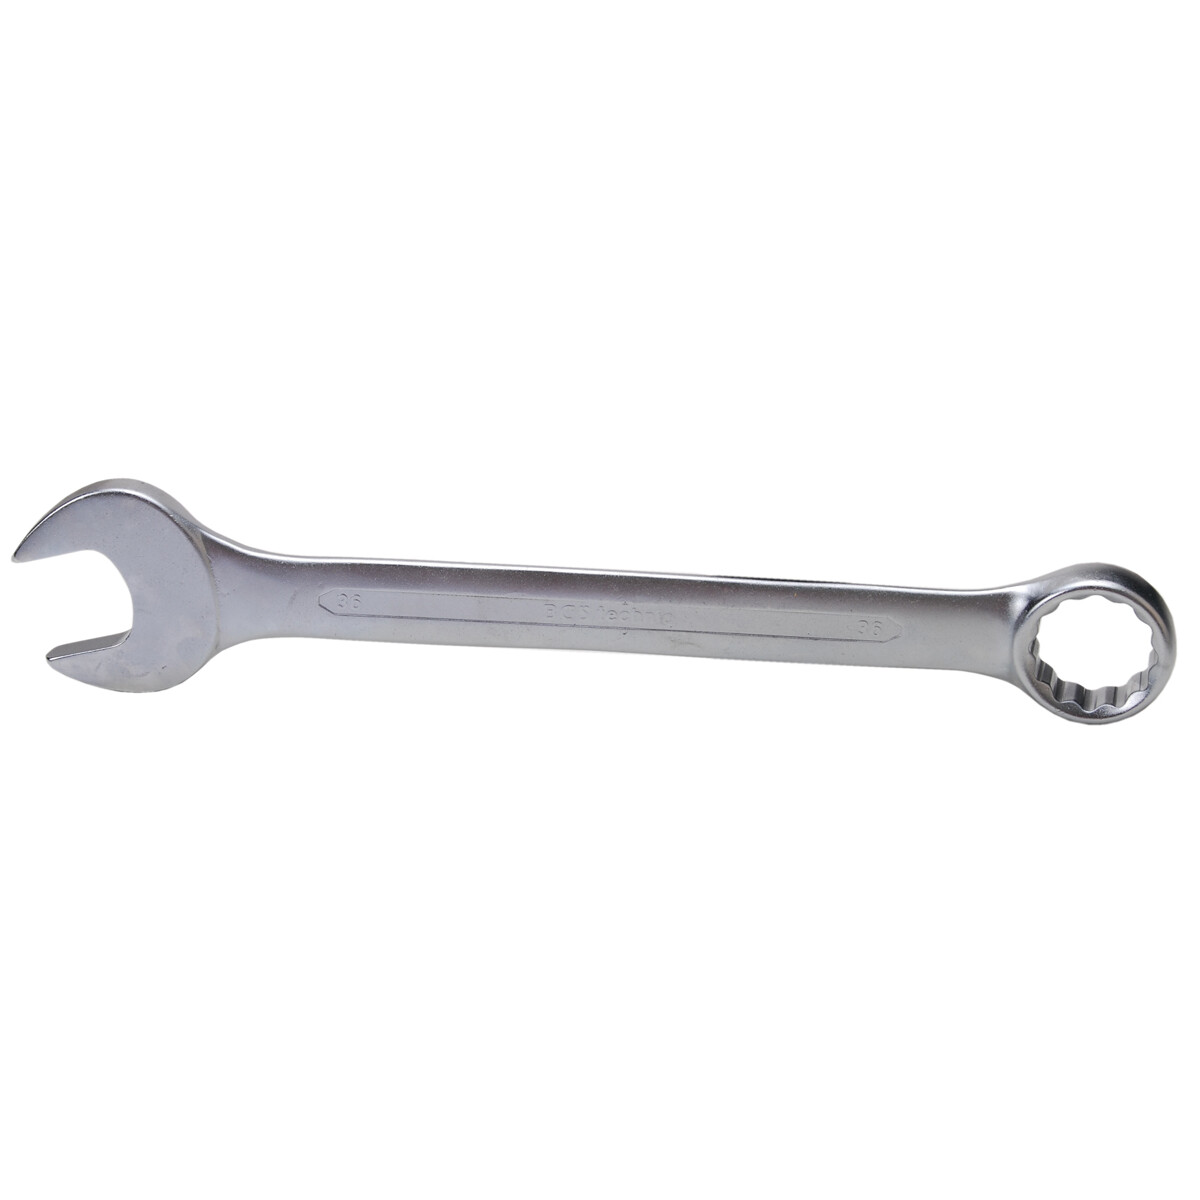 BGS Combination Spanner | 36 mm (BGS 1086)